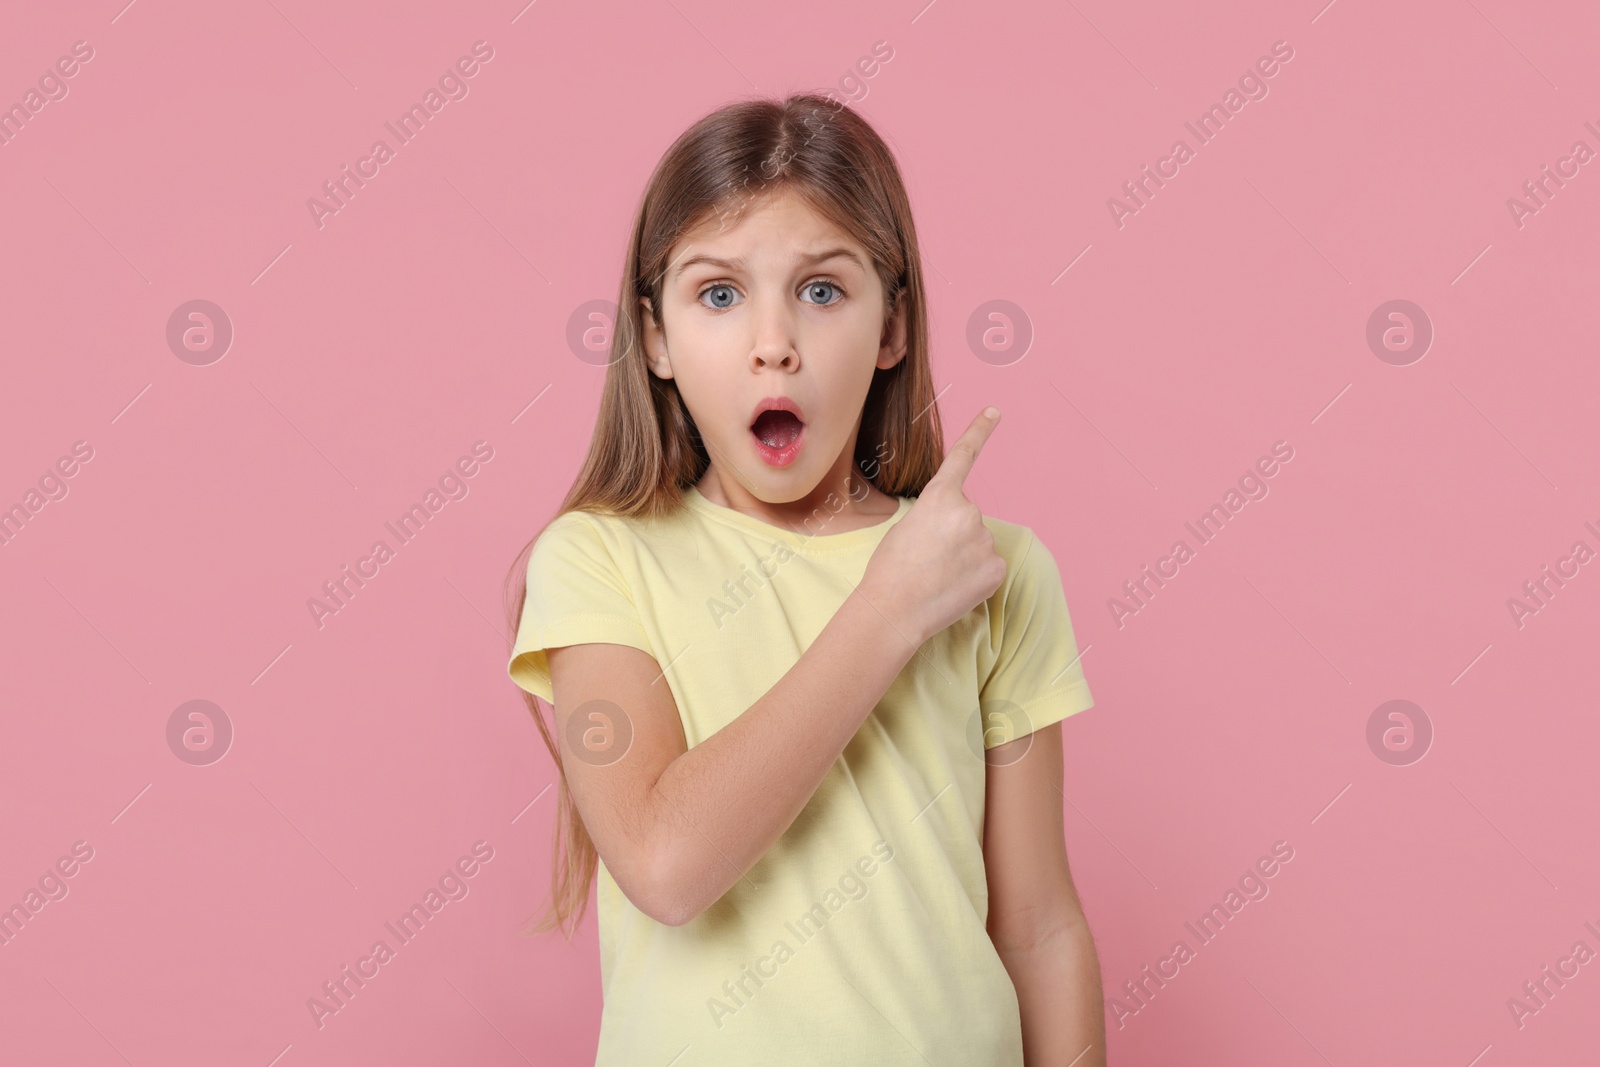 Photo of Surprised girl pointing at something on pink background